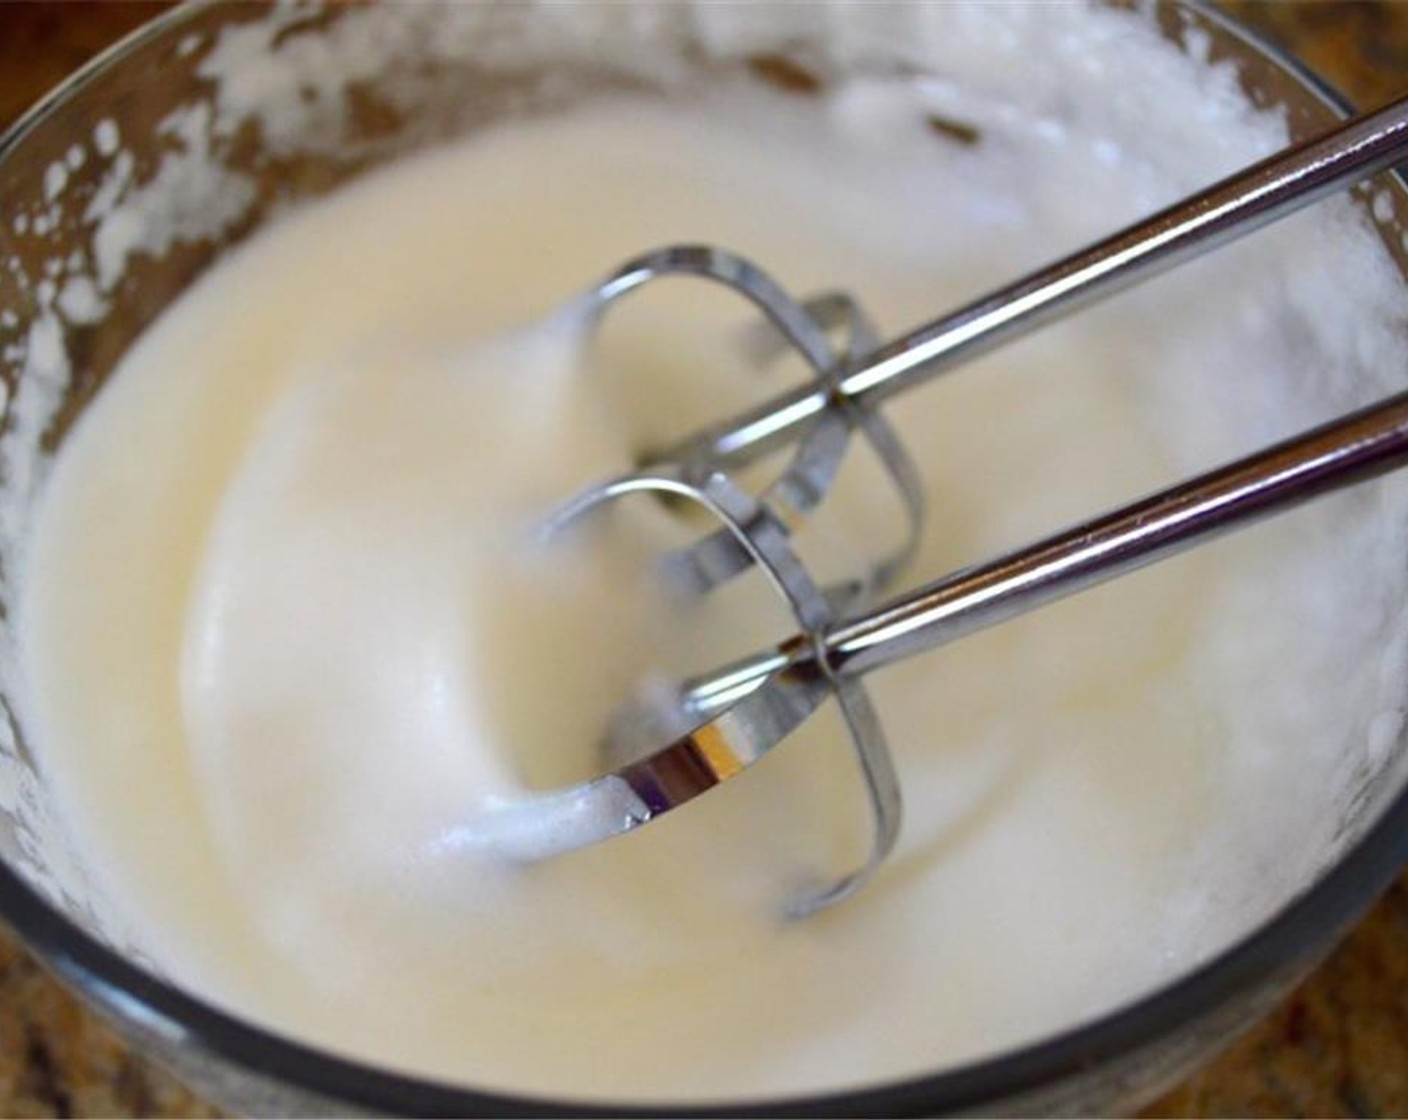 step 4 Take the Egg Whites and whip them up with a hand mixer until they are fluffy and stiff.